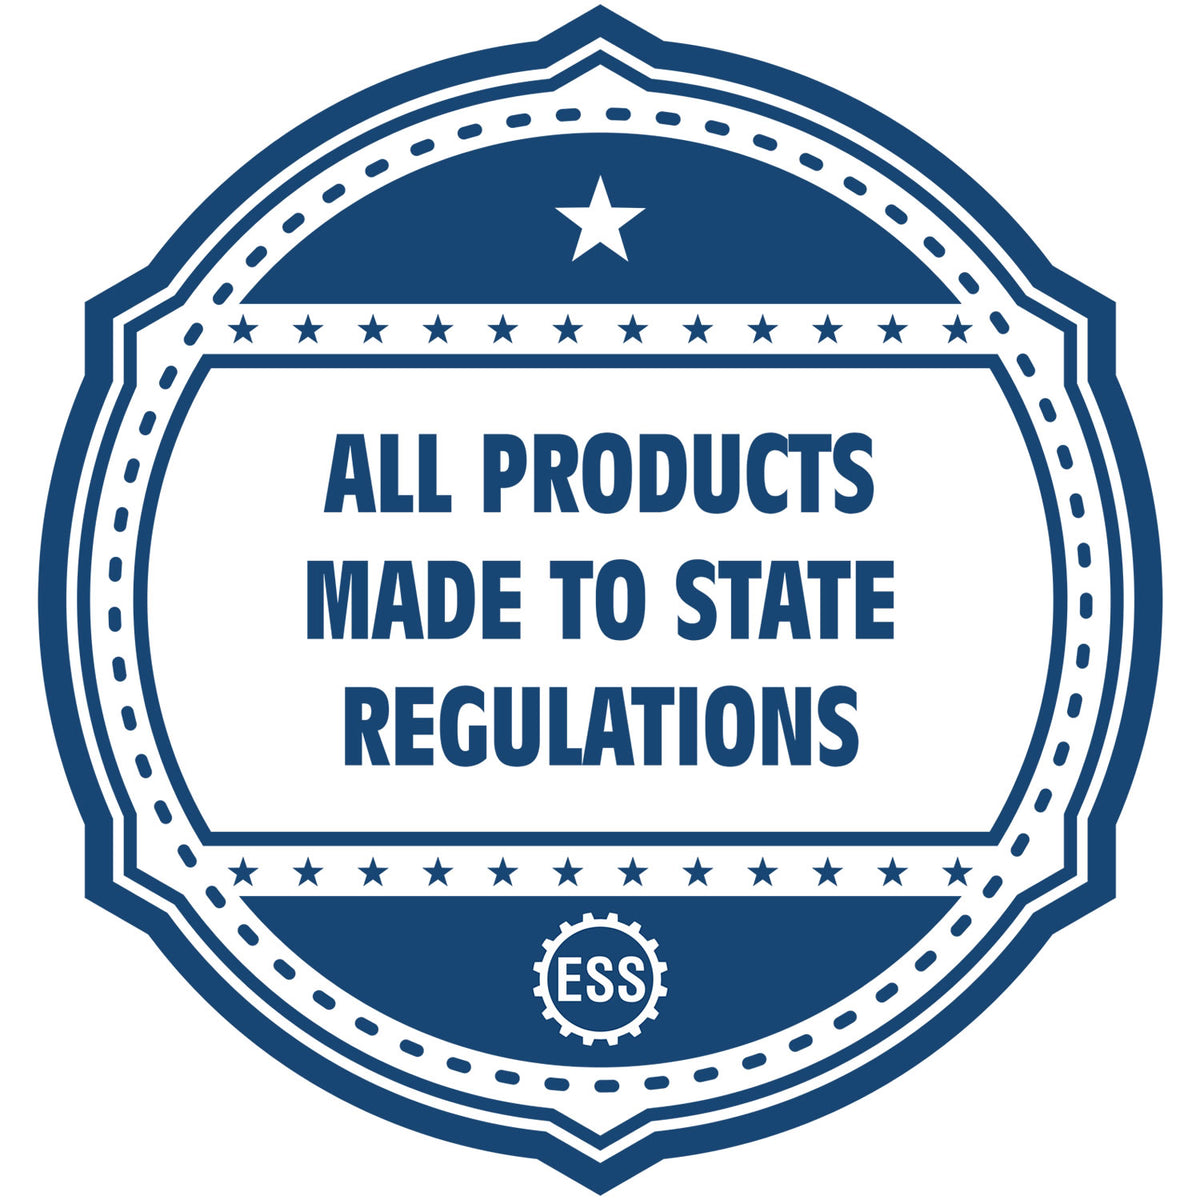 An icon or badge element for the Indiana Desk Architect Embossing Seal showing that this product is made in compliance with state regulations.